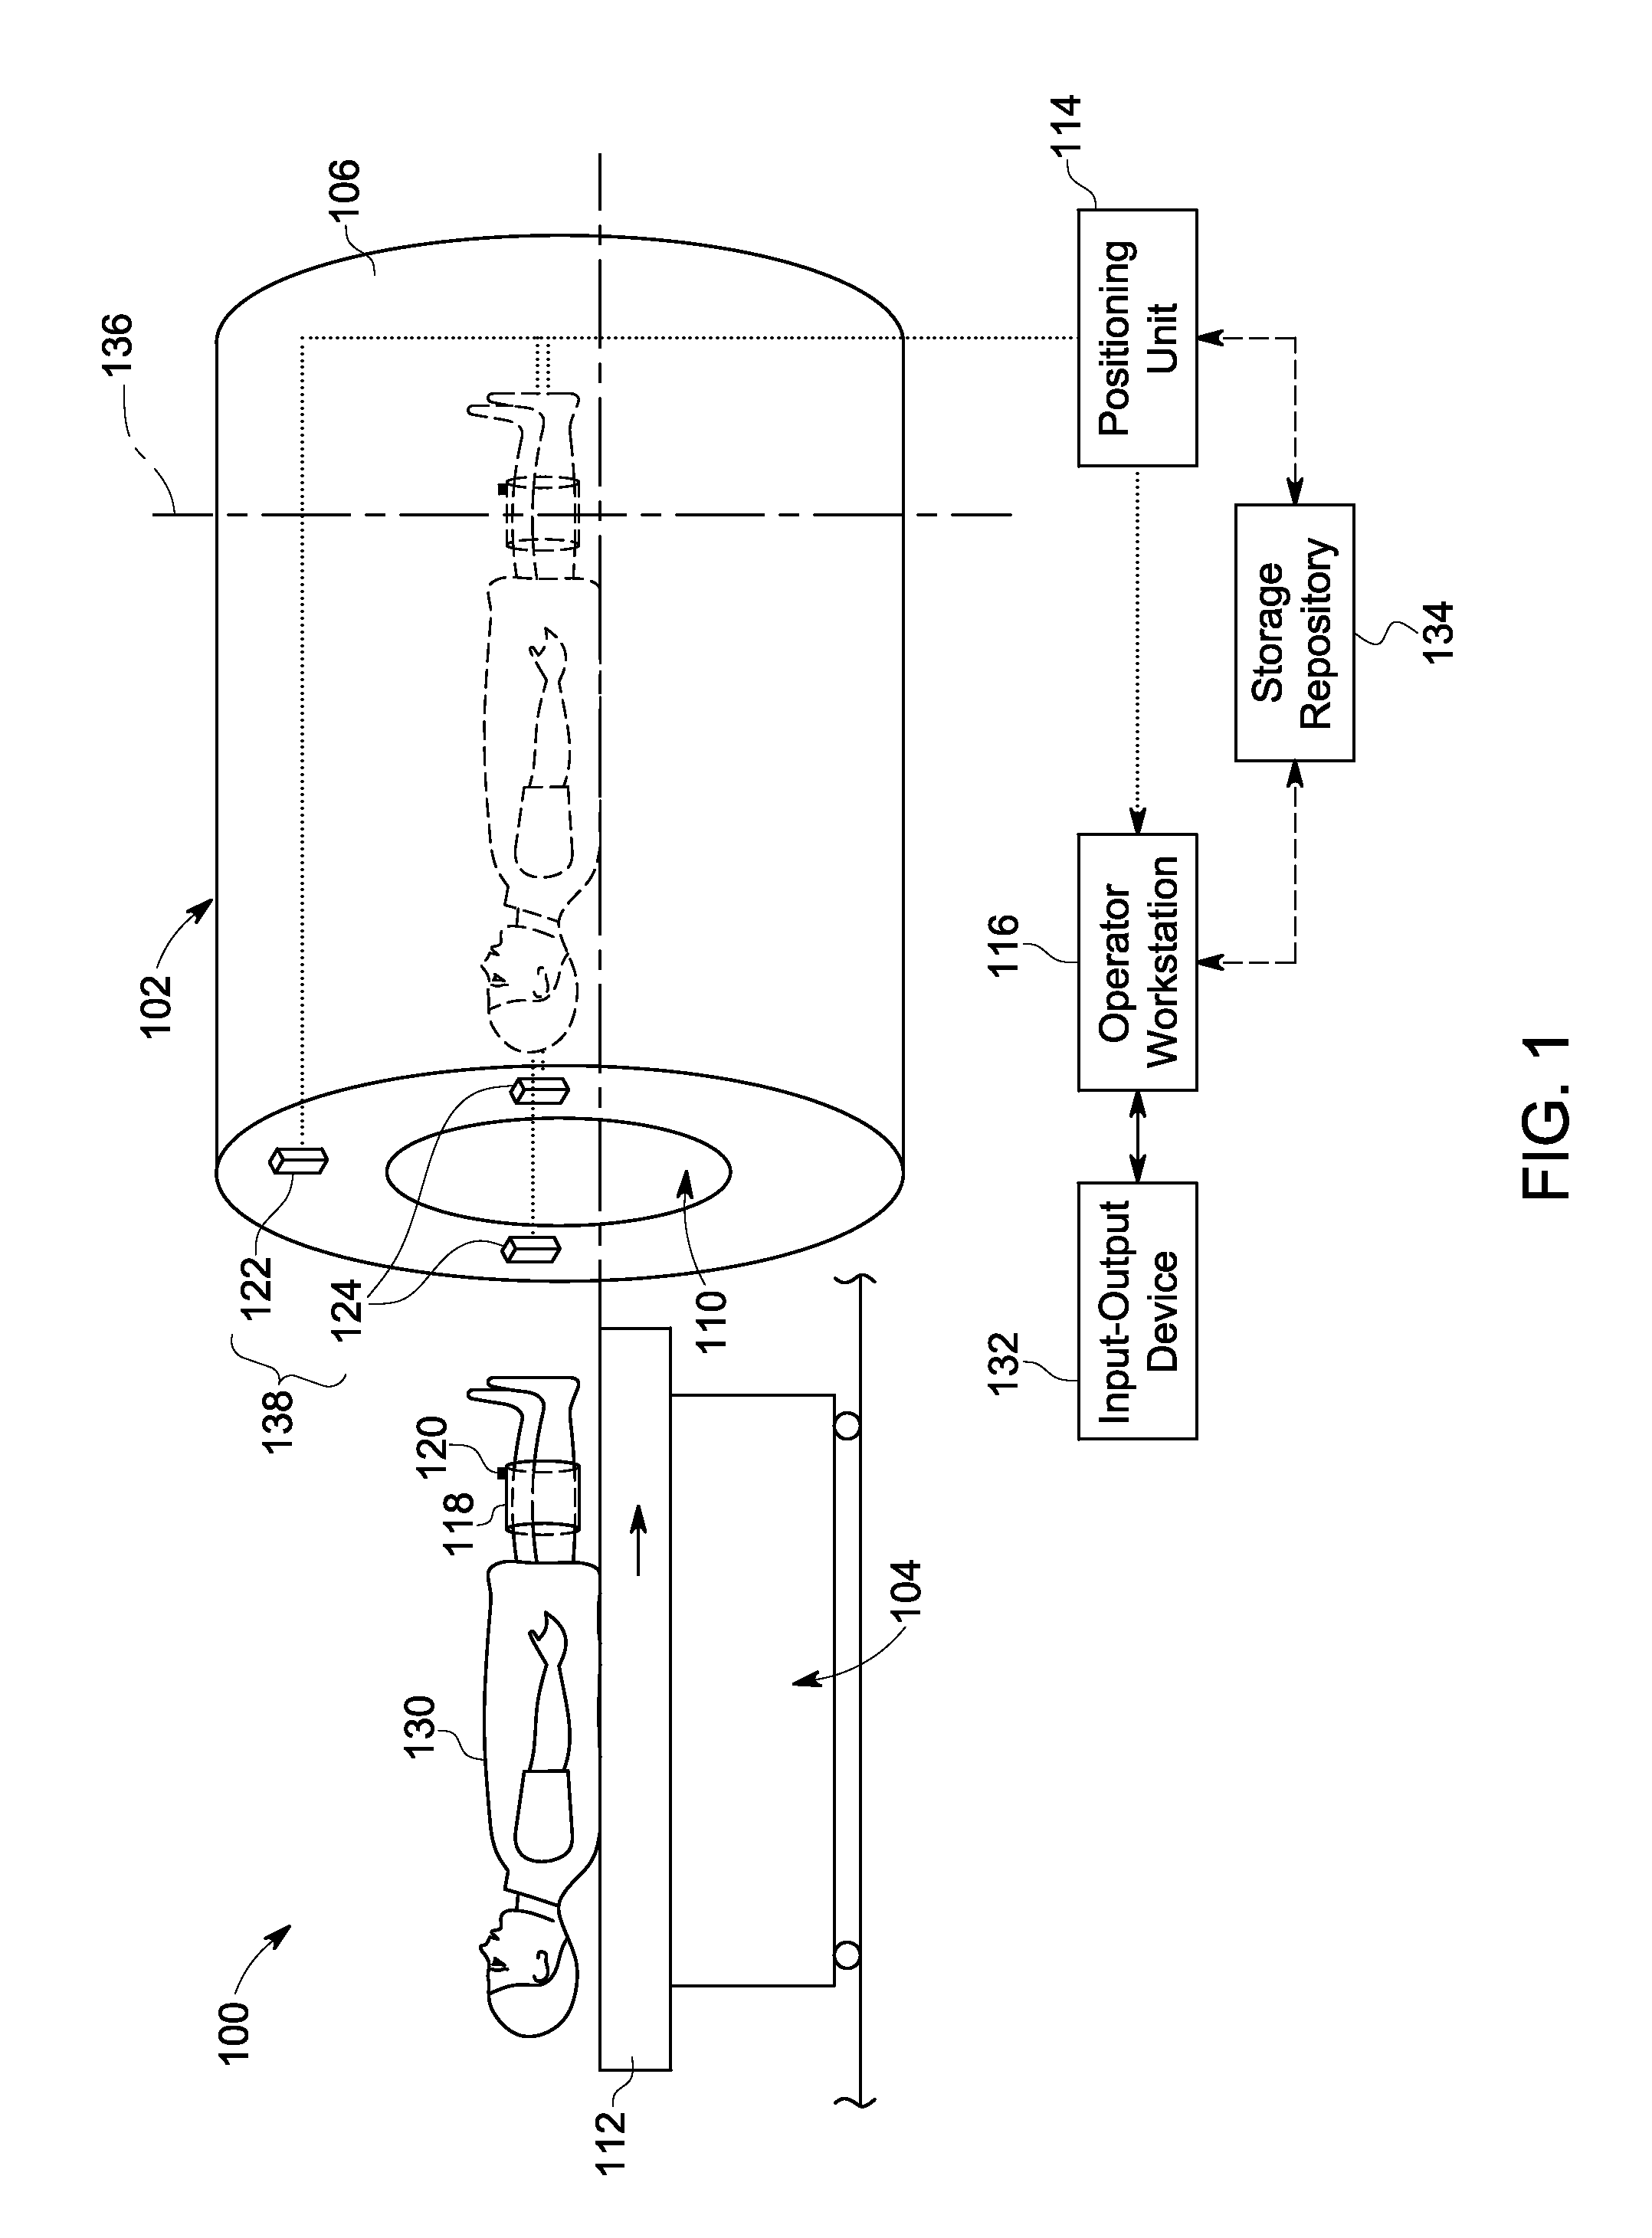 Systems and methods for landmark correction in magnetic resonance imaging